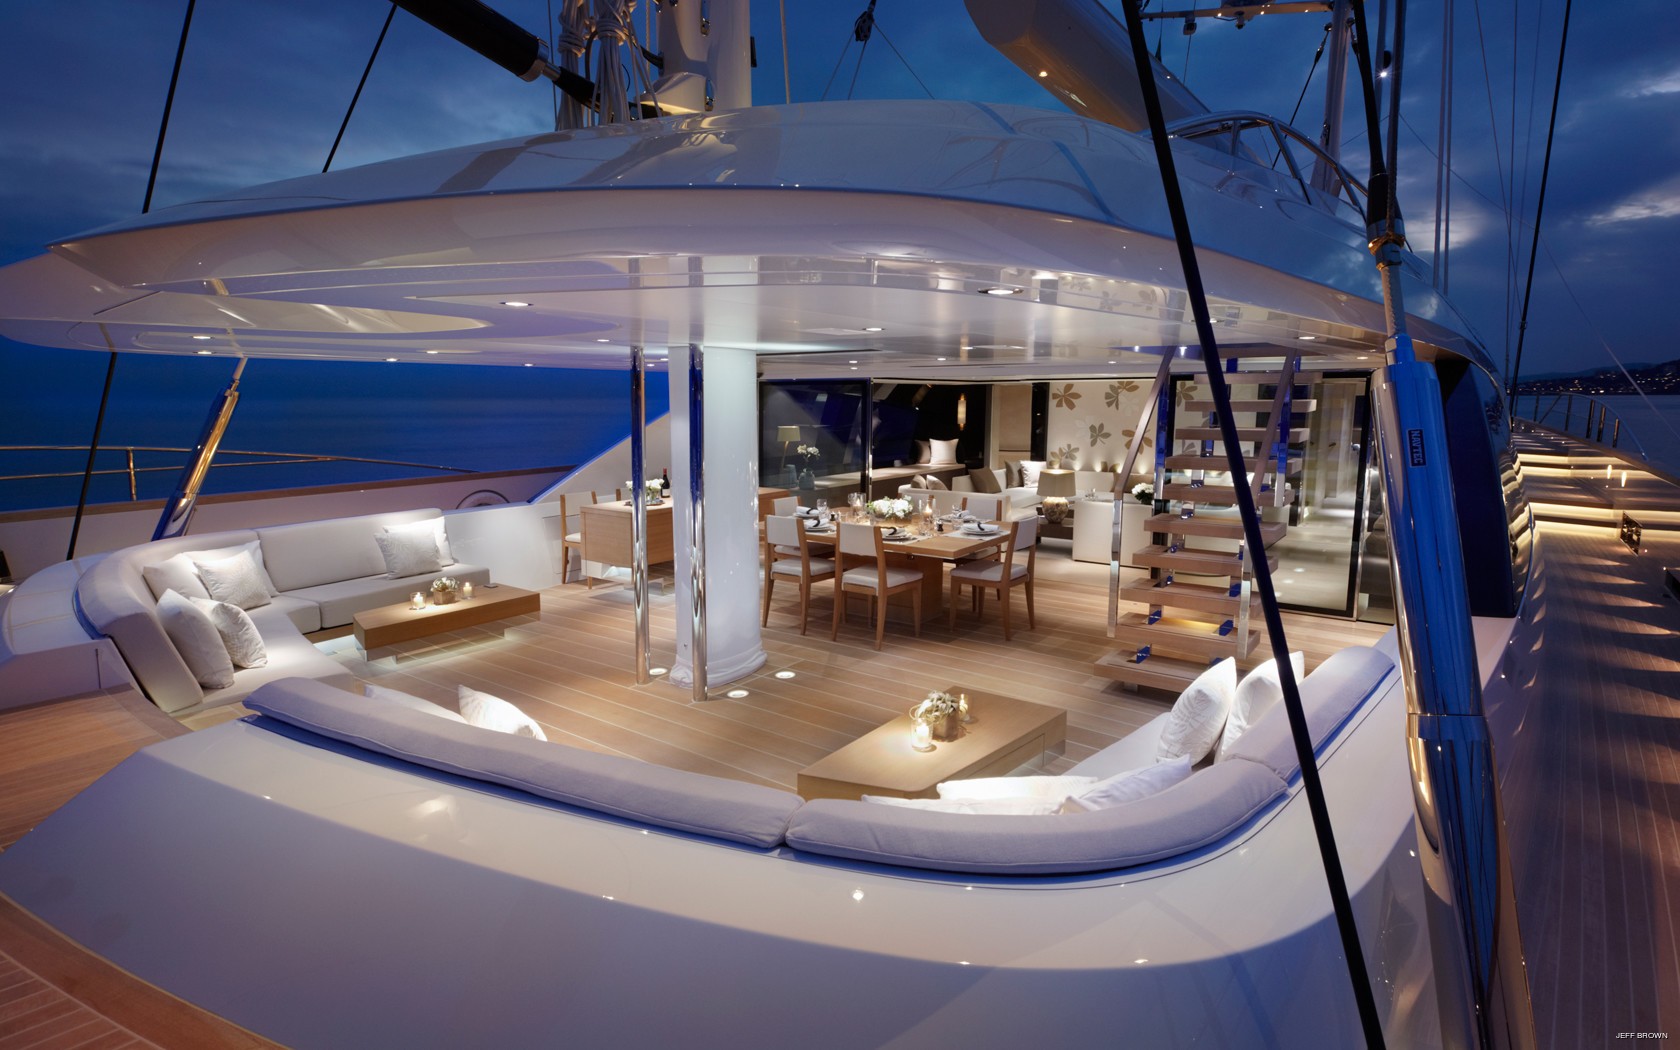 aft deck in the evening